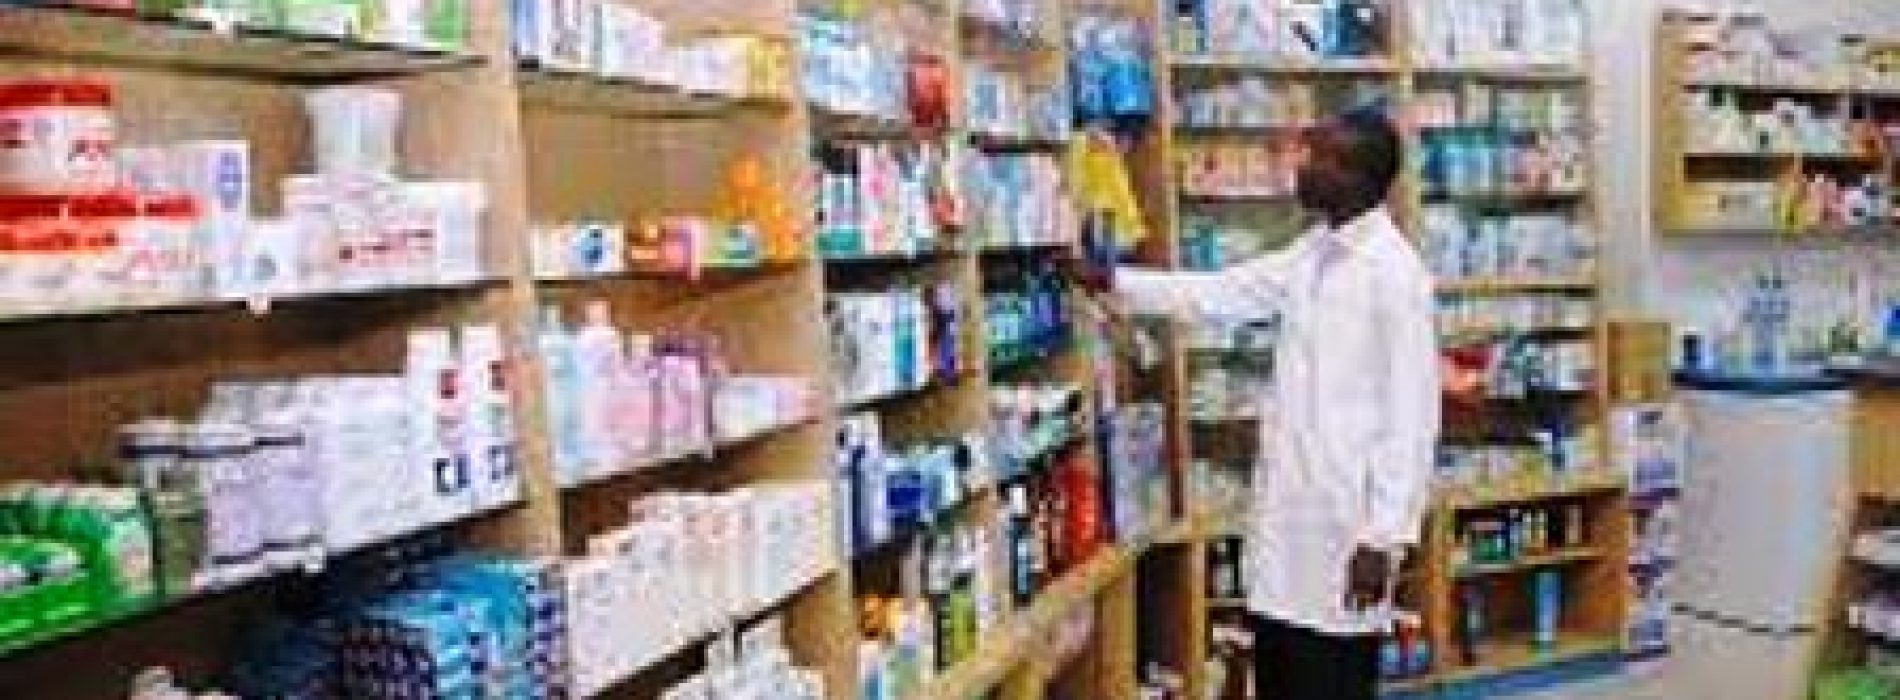 ACPN orders closure of Pharmacy shops on Tuesday